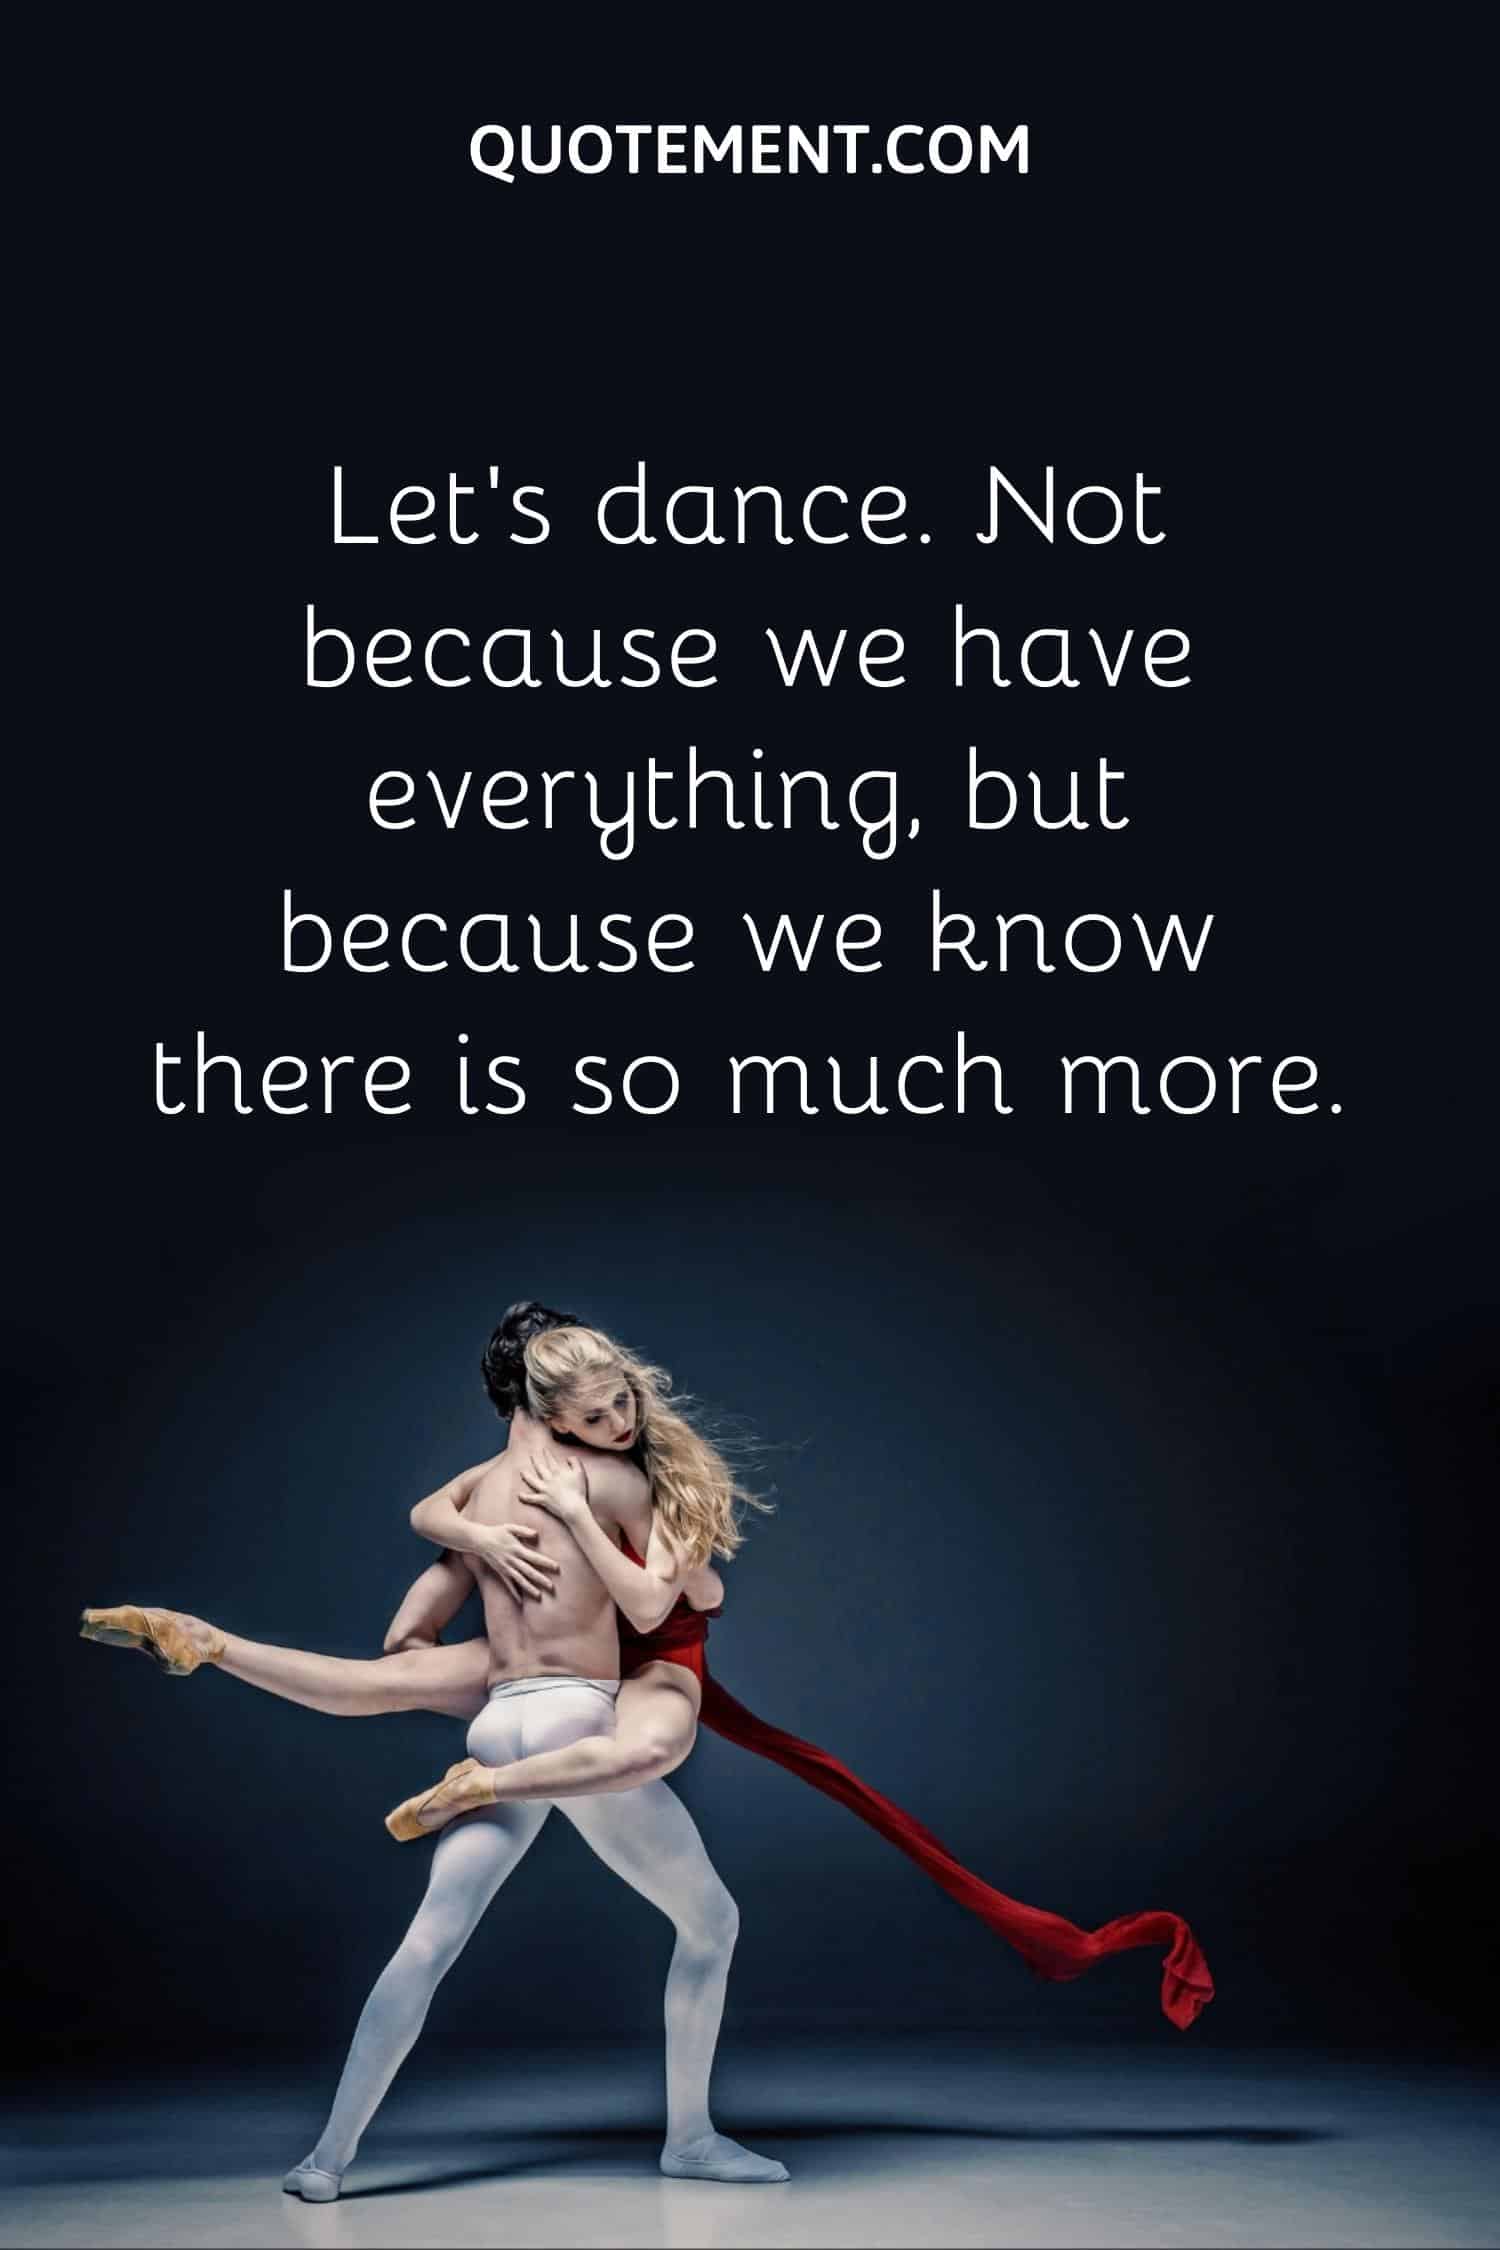 Let’s dance. Not because we have everything, but because we know there is so much more.